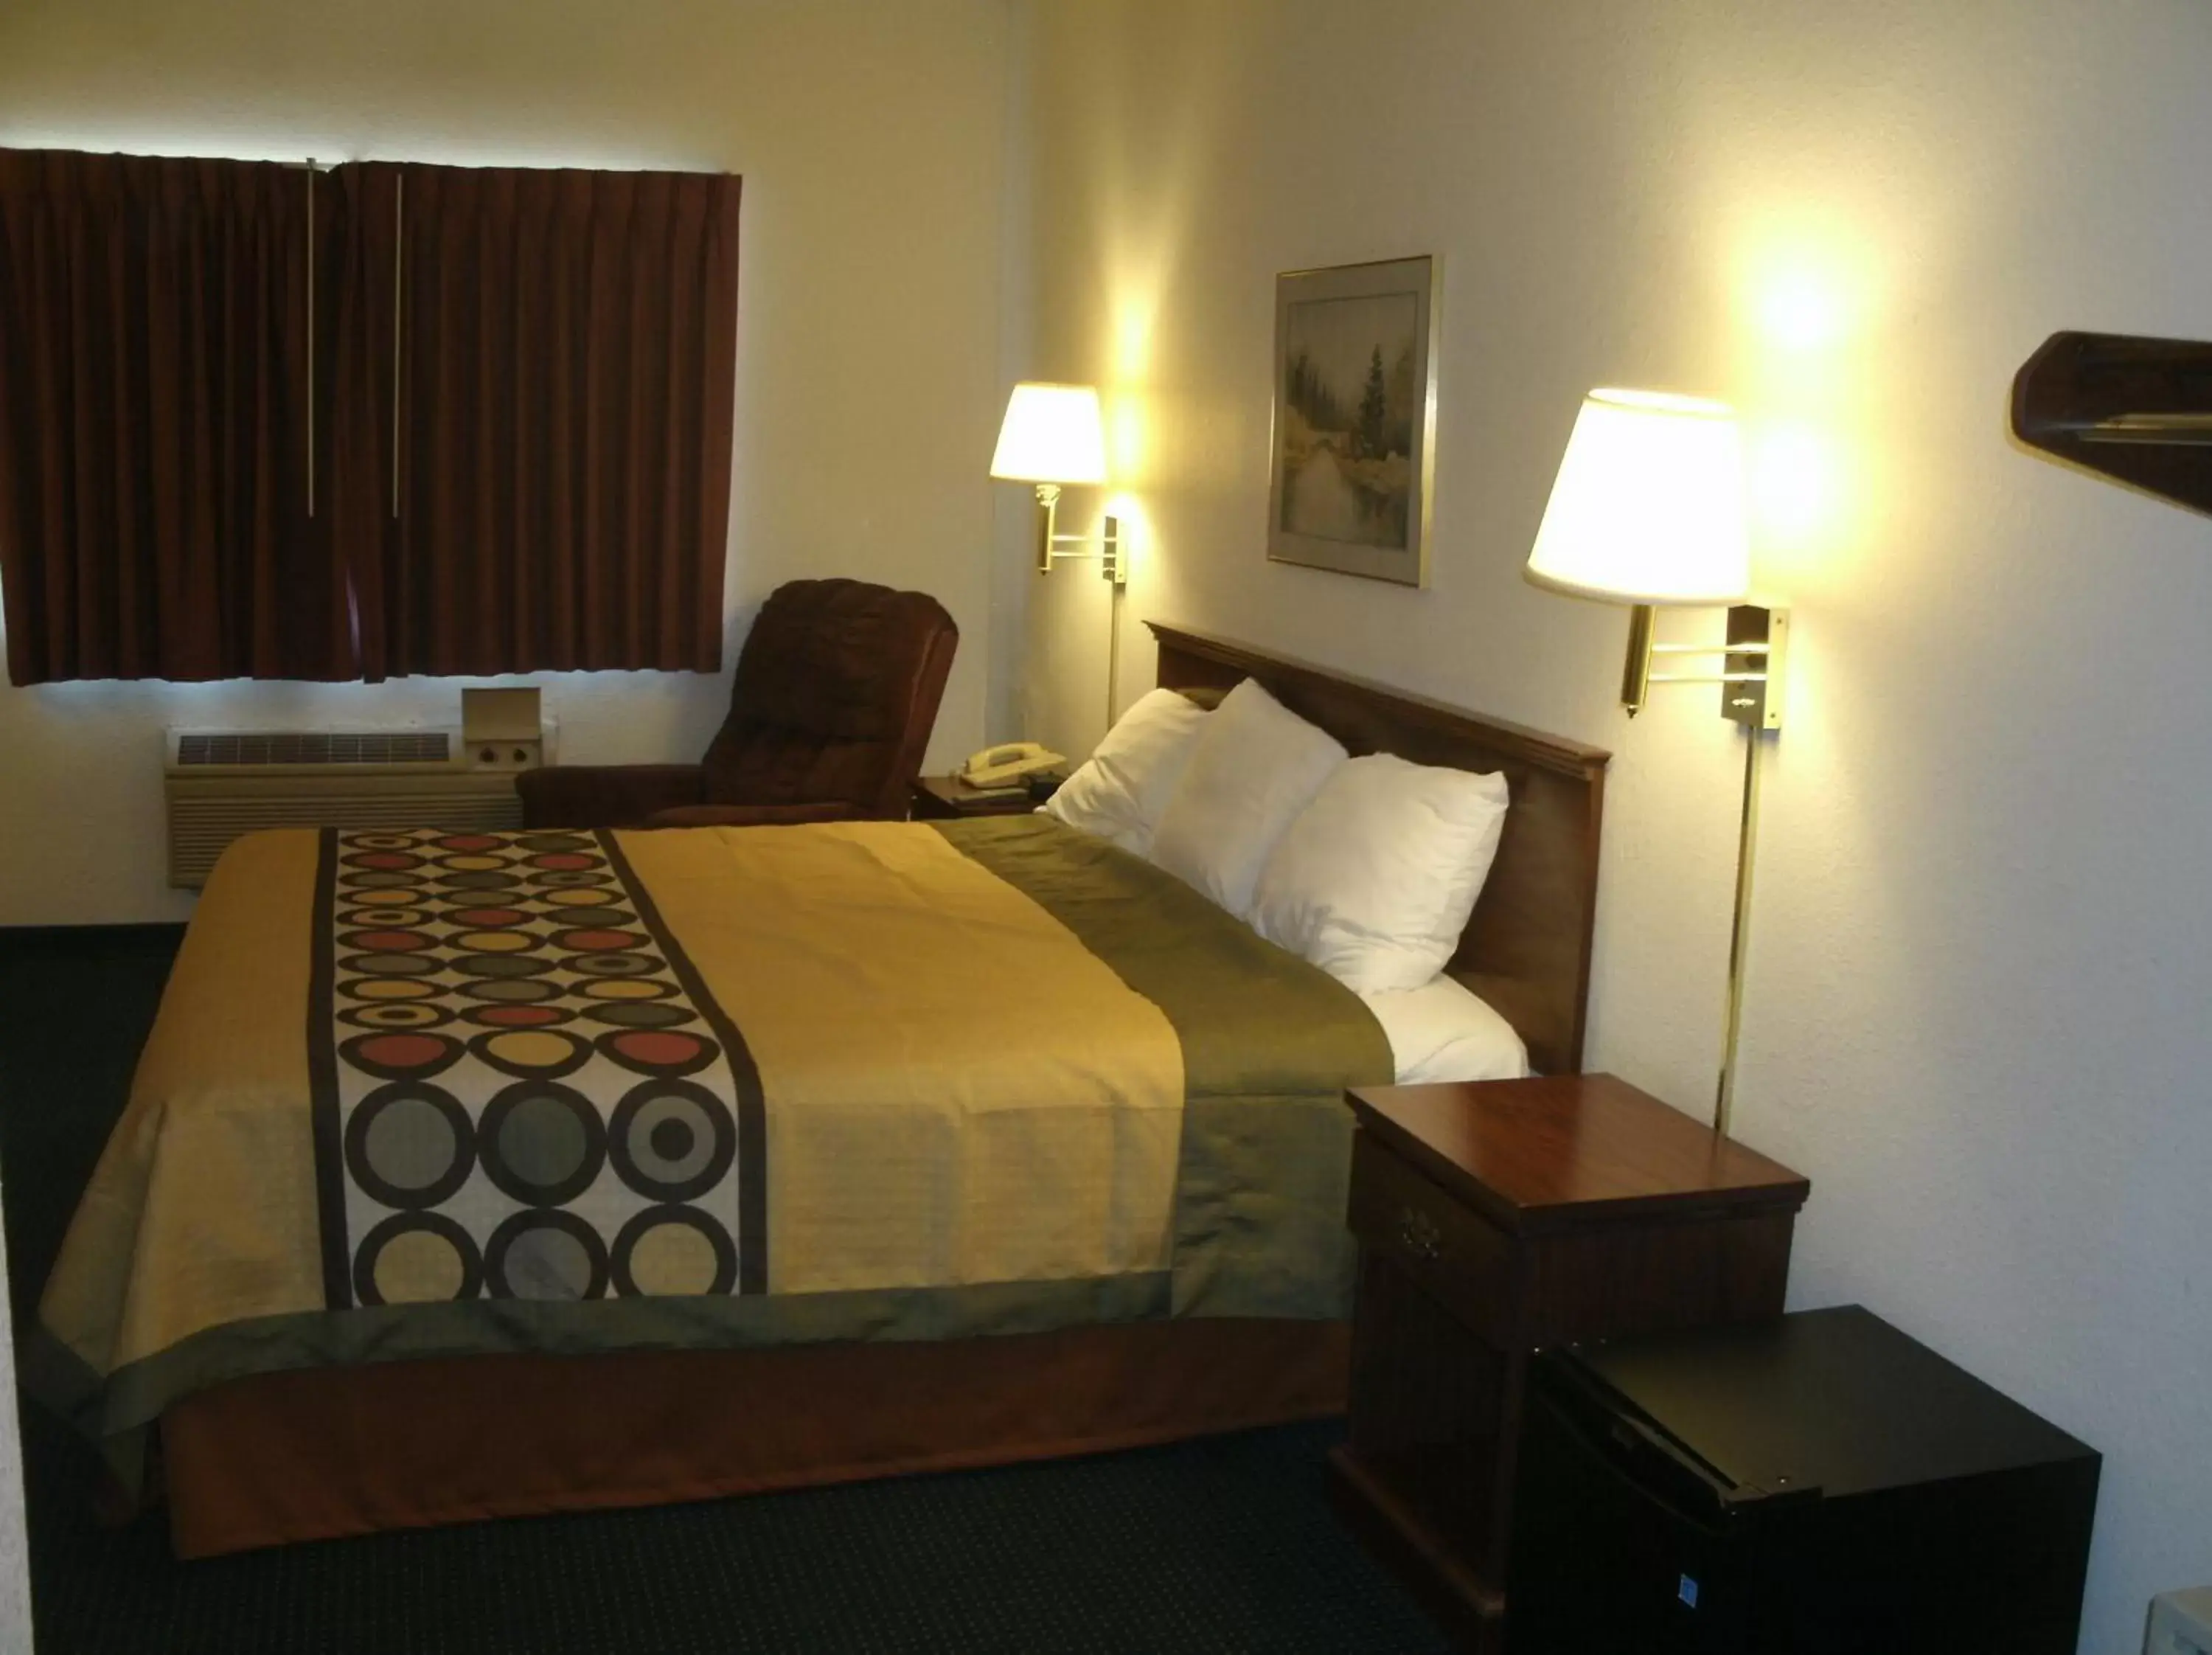 King Room - Non-Smoking in Super 8 by Wyndham Platte City Kansas City Area